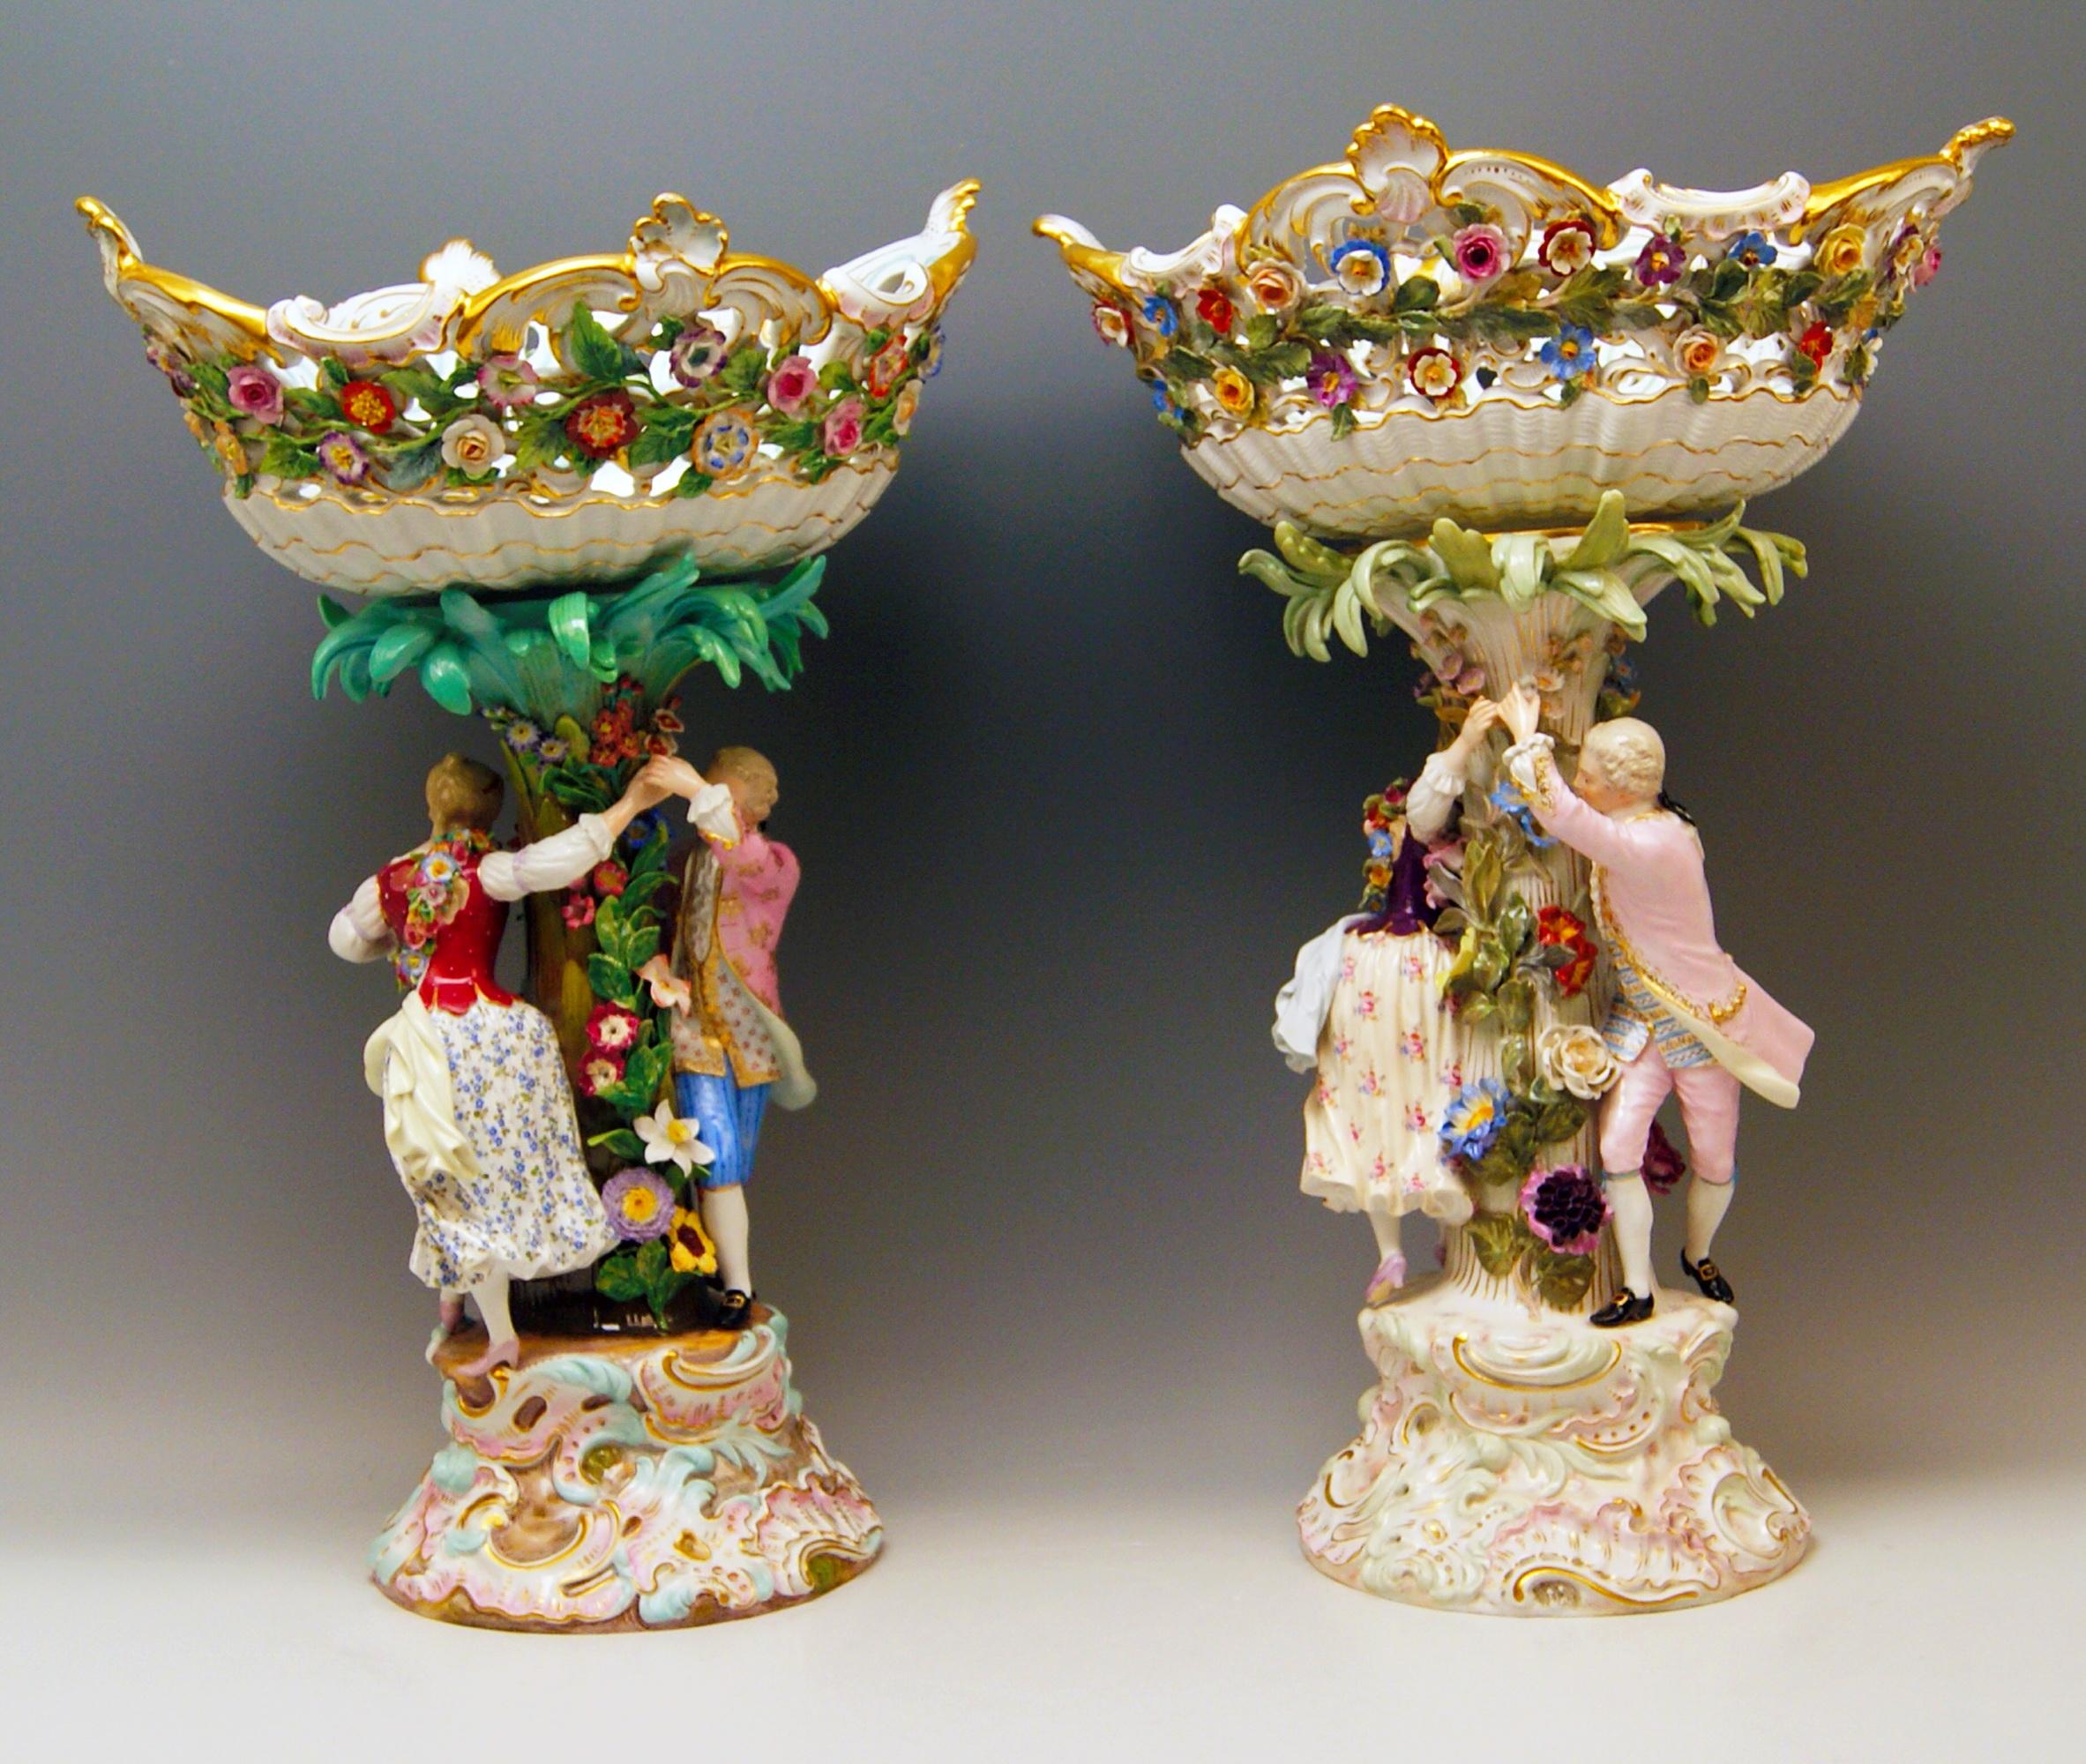 Meissen a pair of most remarkable tall centrepieces / fruitbowls:
Each of them decorated with a pair of rococo gardeners (male and female), circa 1870

Measures / Dimensions: 
height: 49.0 cm / 19.29 inches 
width of bowl: 35.0 cm / 13.77